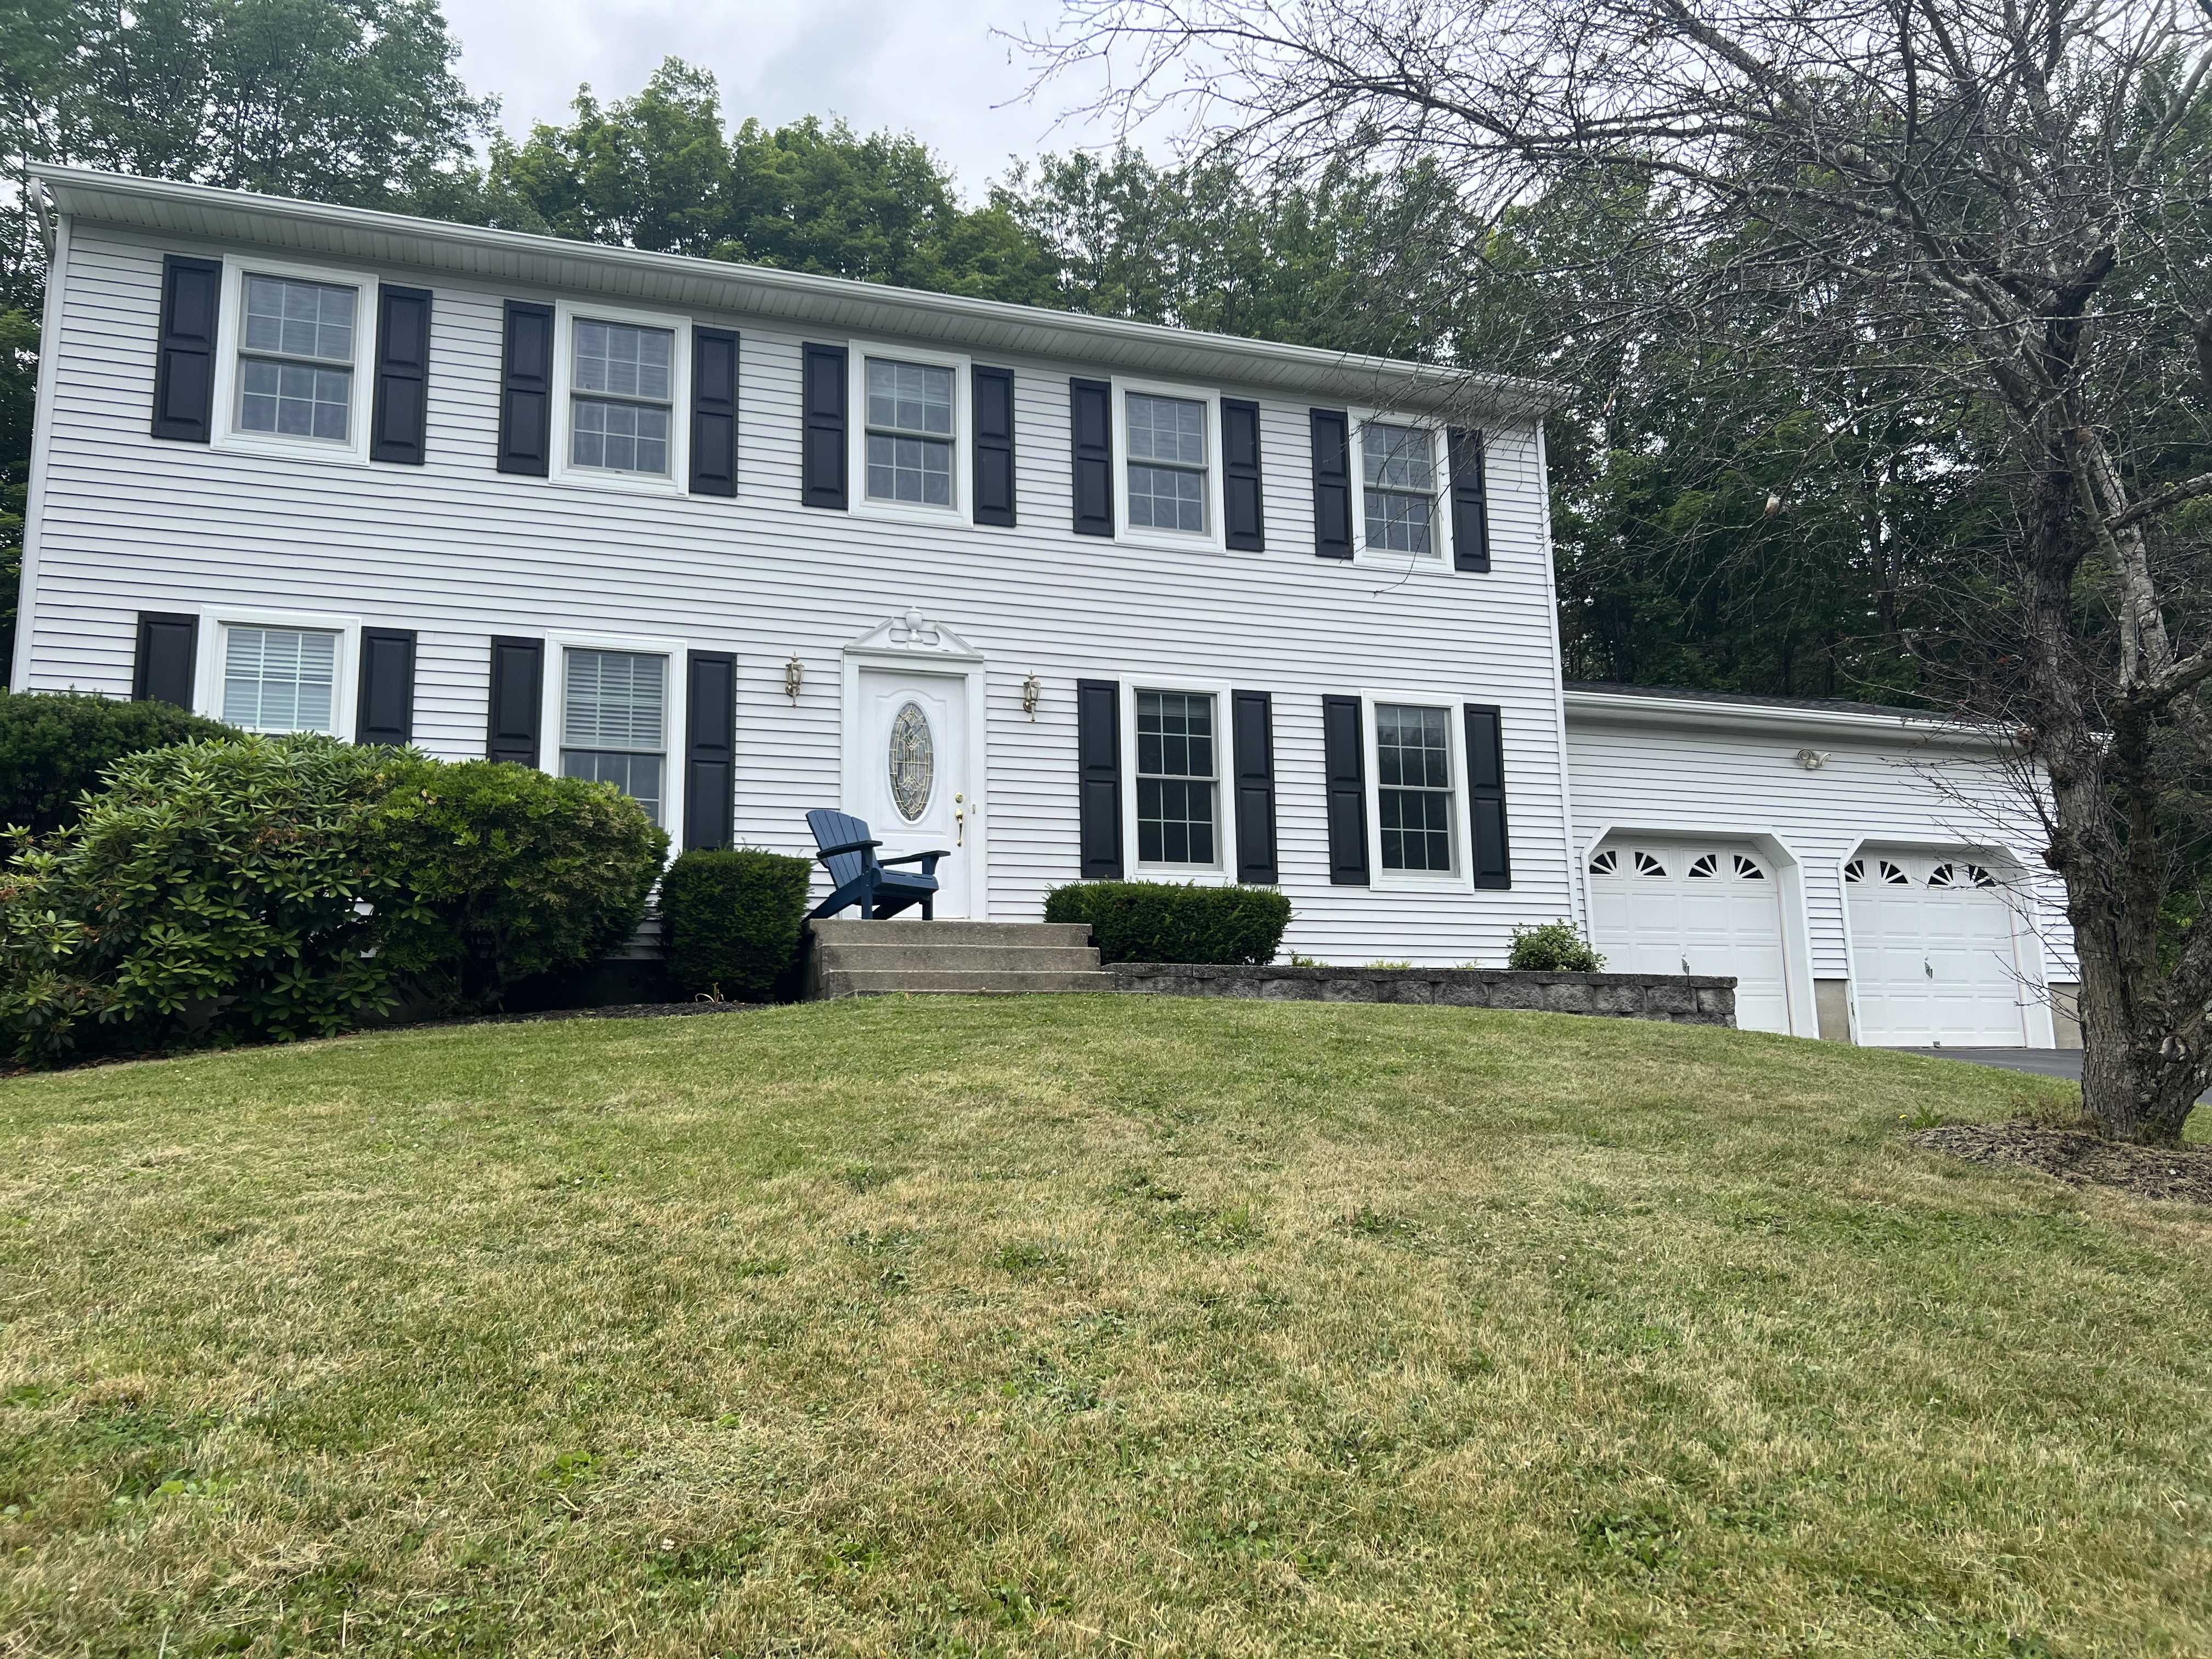 House washing in Pleasant Valley, NY